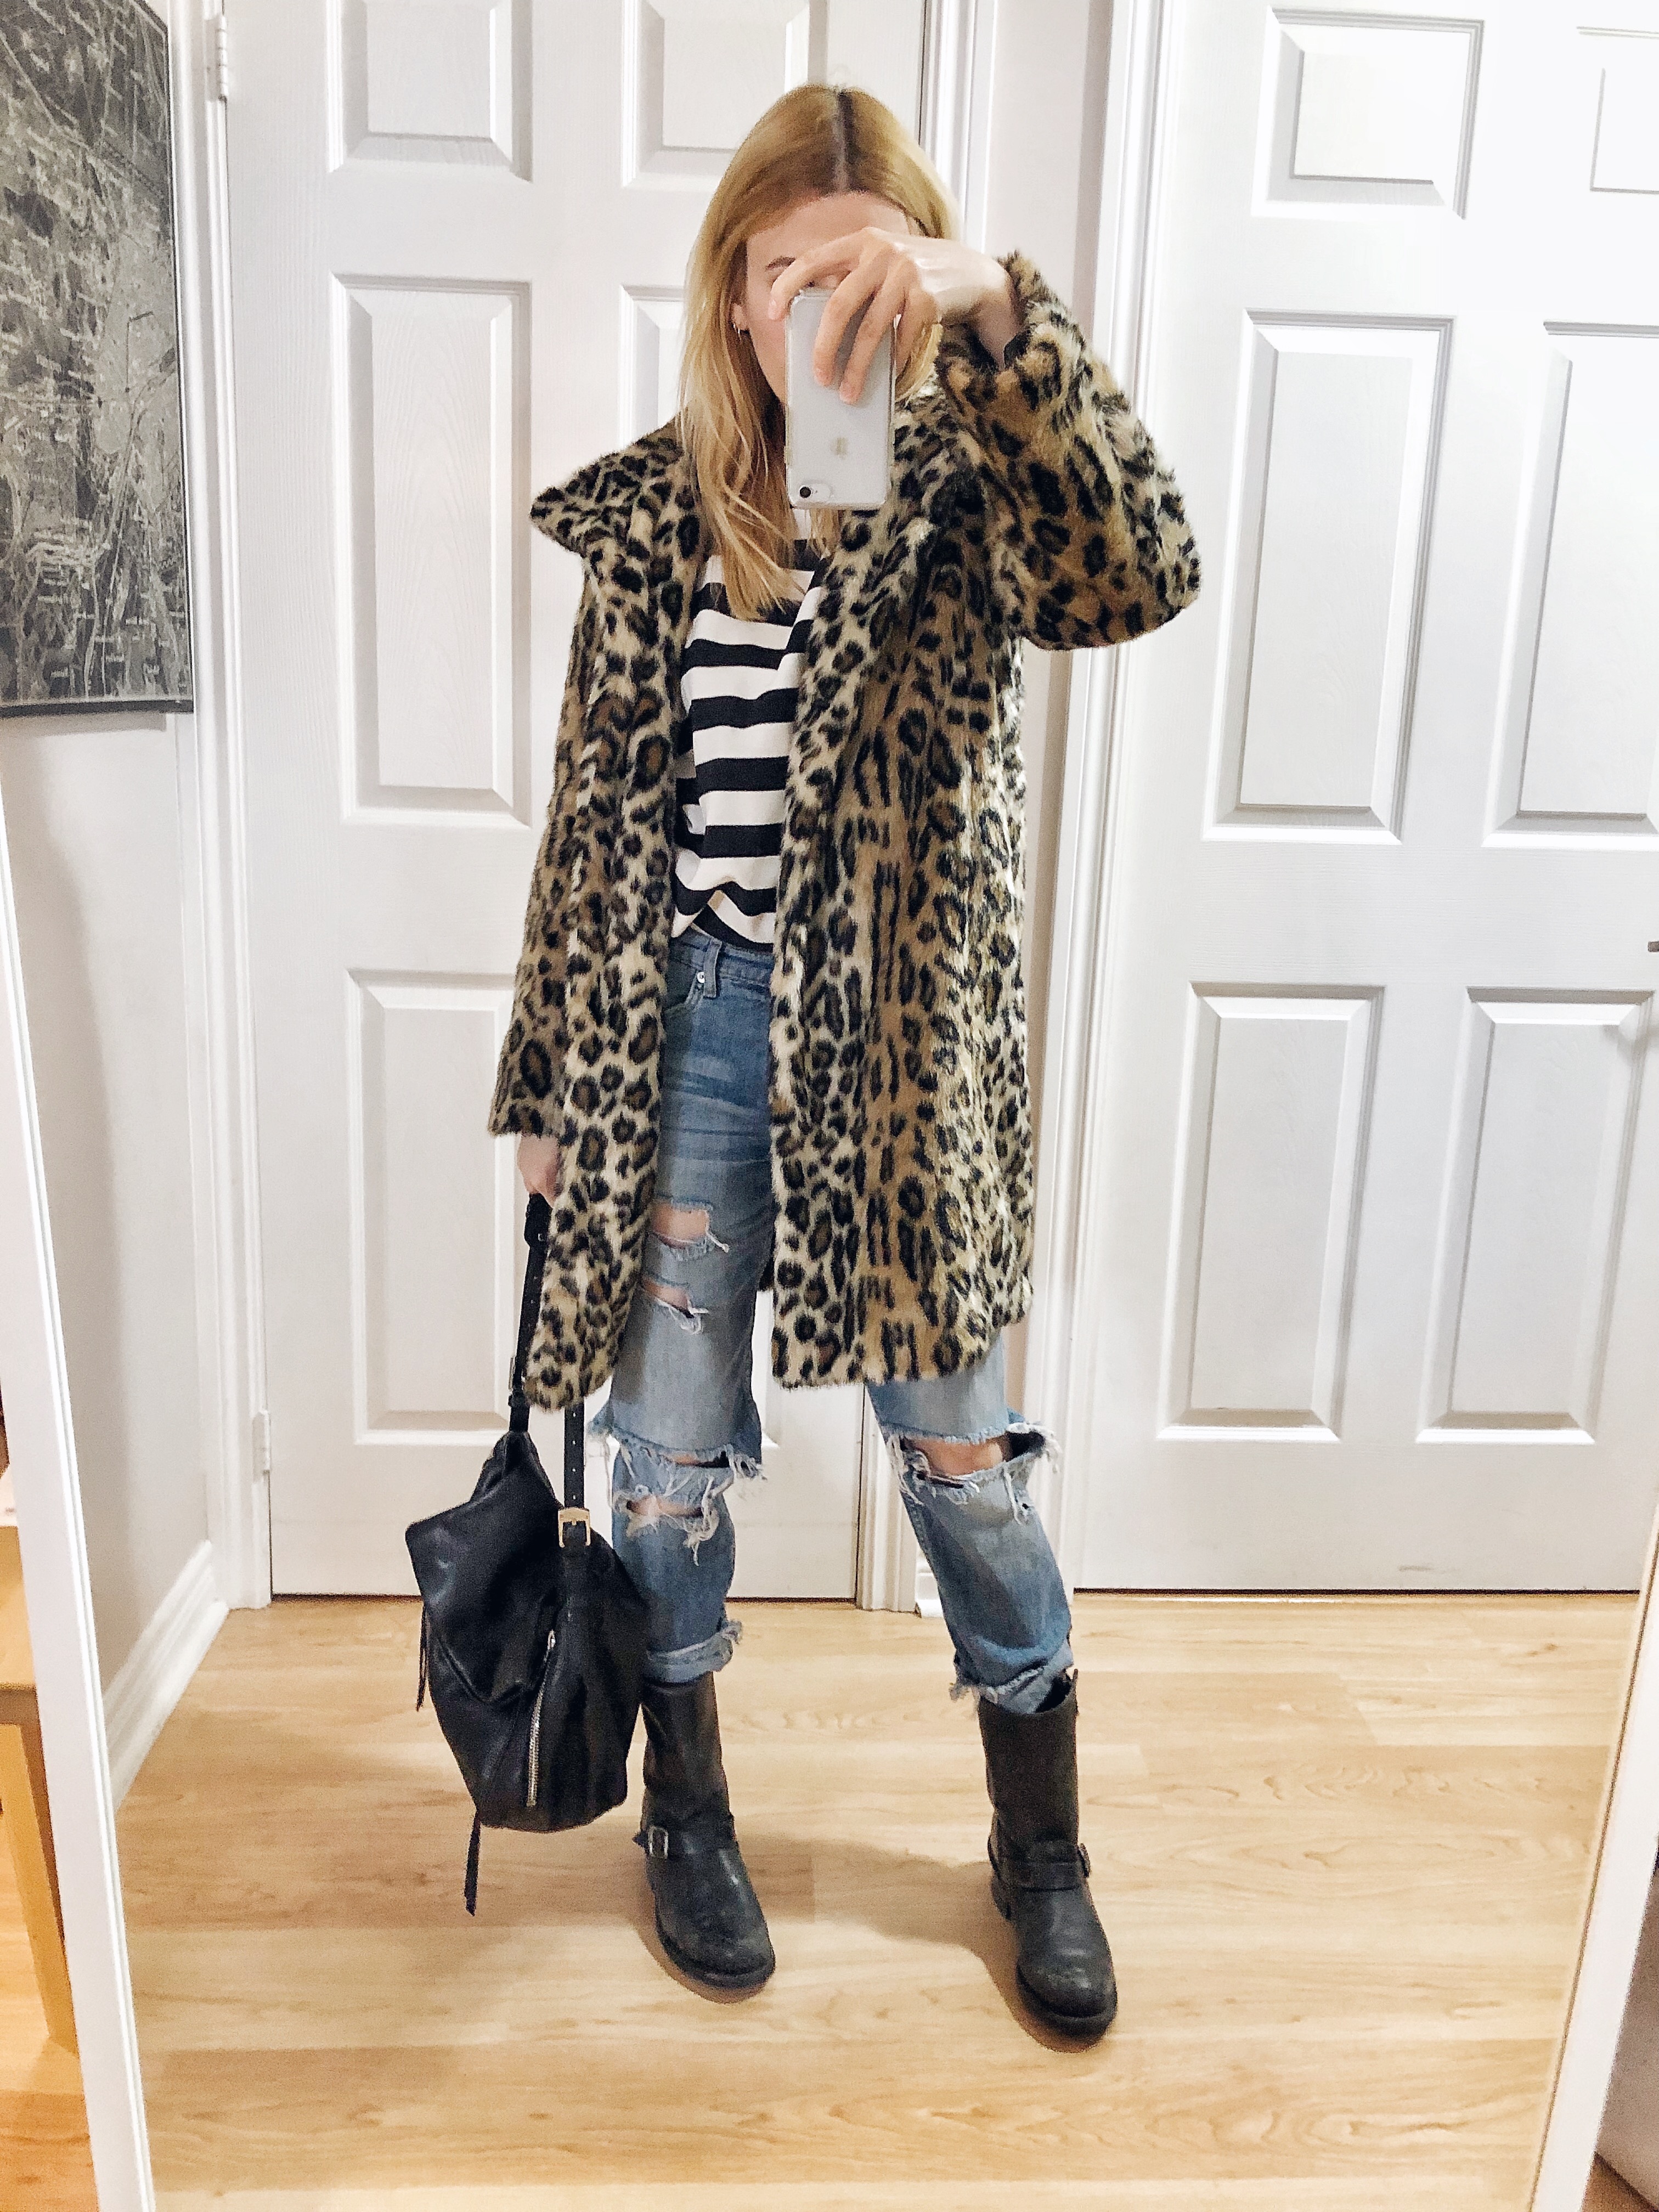 What I Wore. A striped sweatshirt, boyfriend jeans, animal print coat, and Frye Engineer 12R boots. 